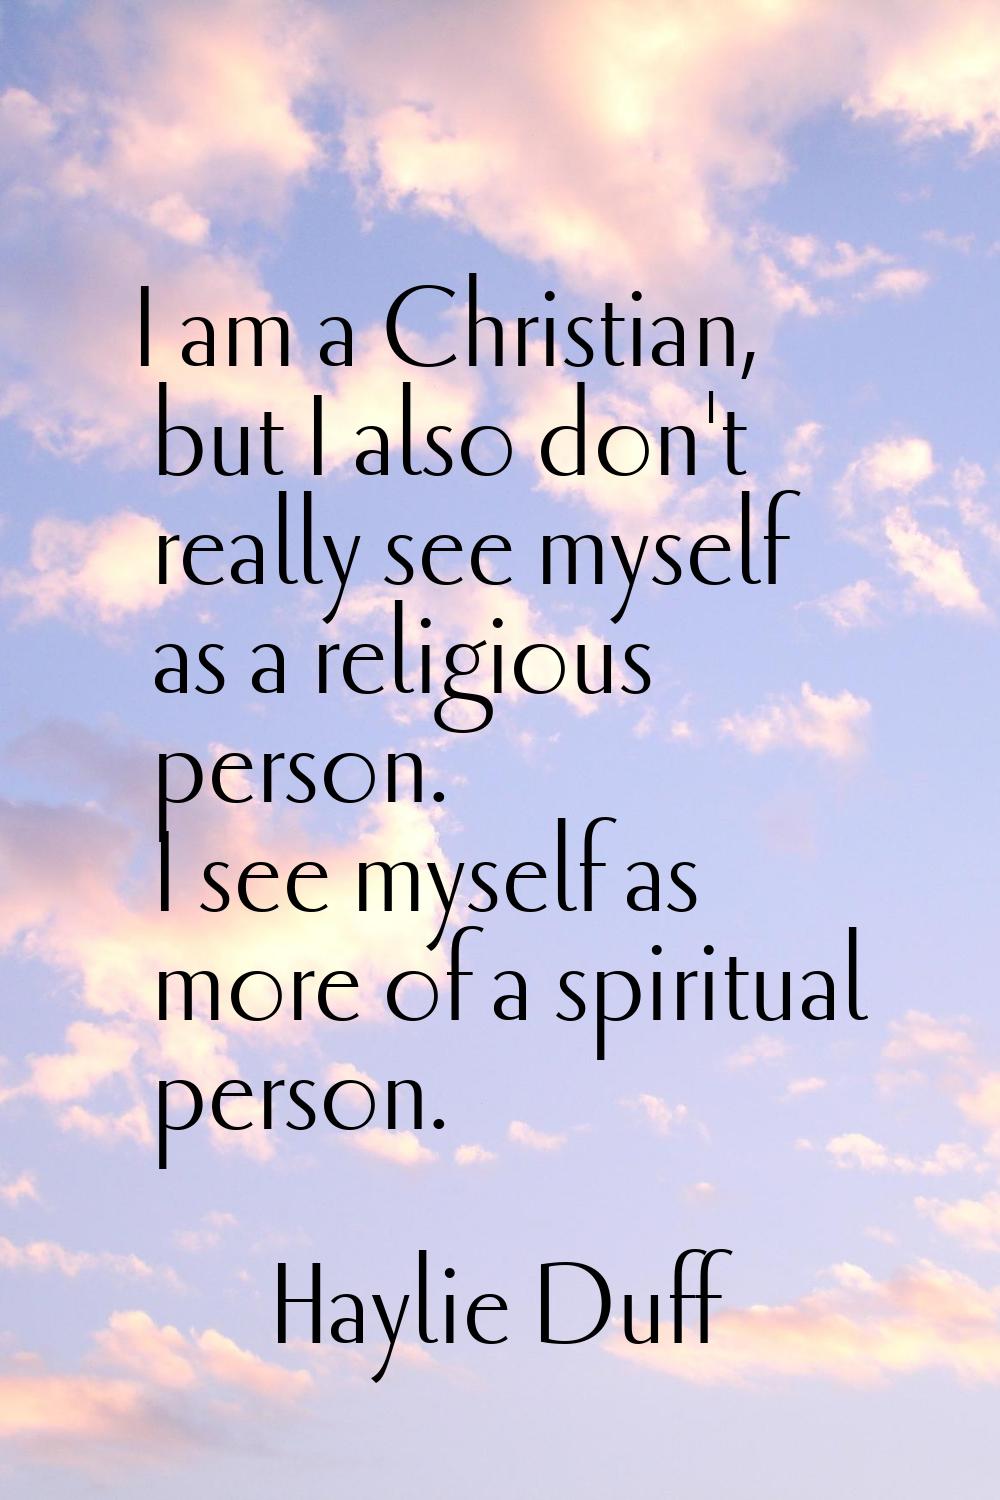 I am a Christian, but I also don't really see myself as a religious person. I see myself as more of